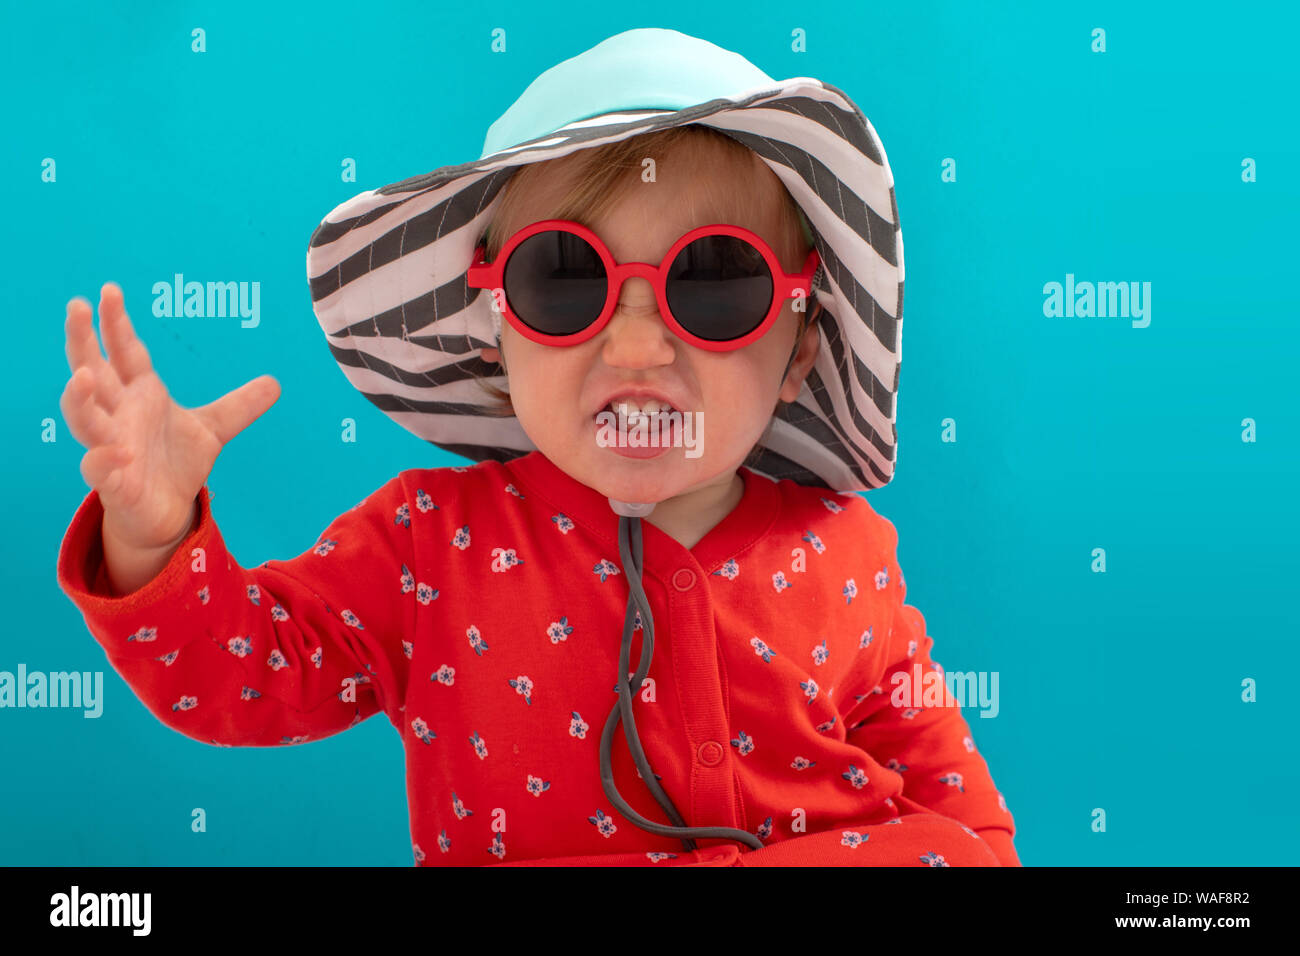 Stylish playful kid in sunglasses and striped hat Stock Photo